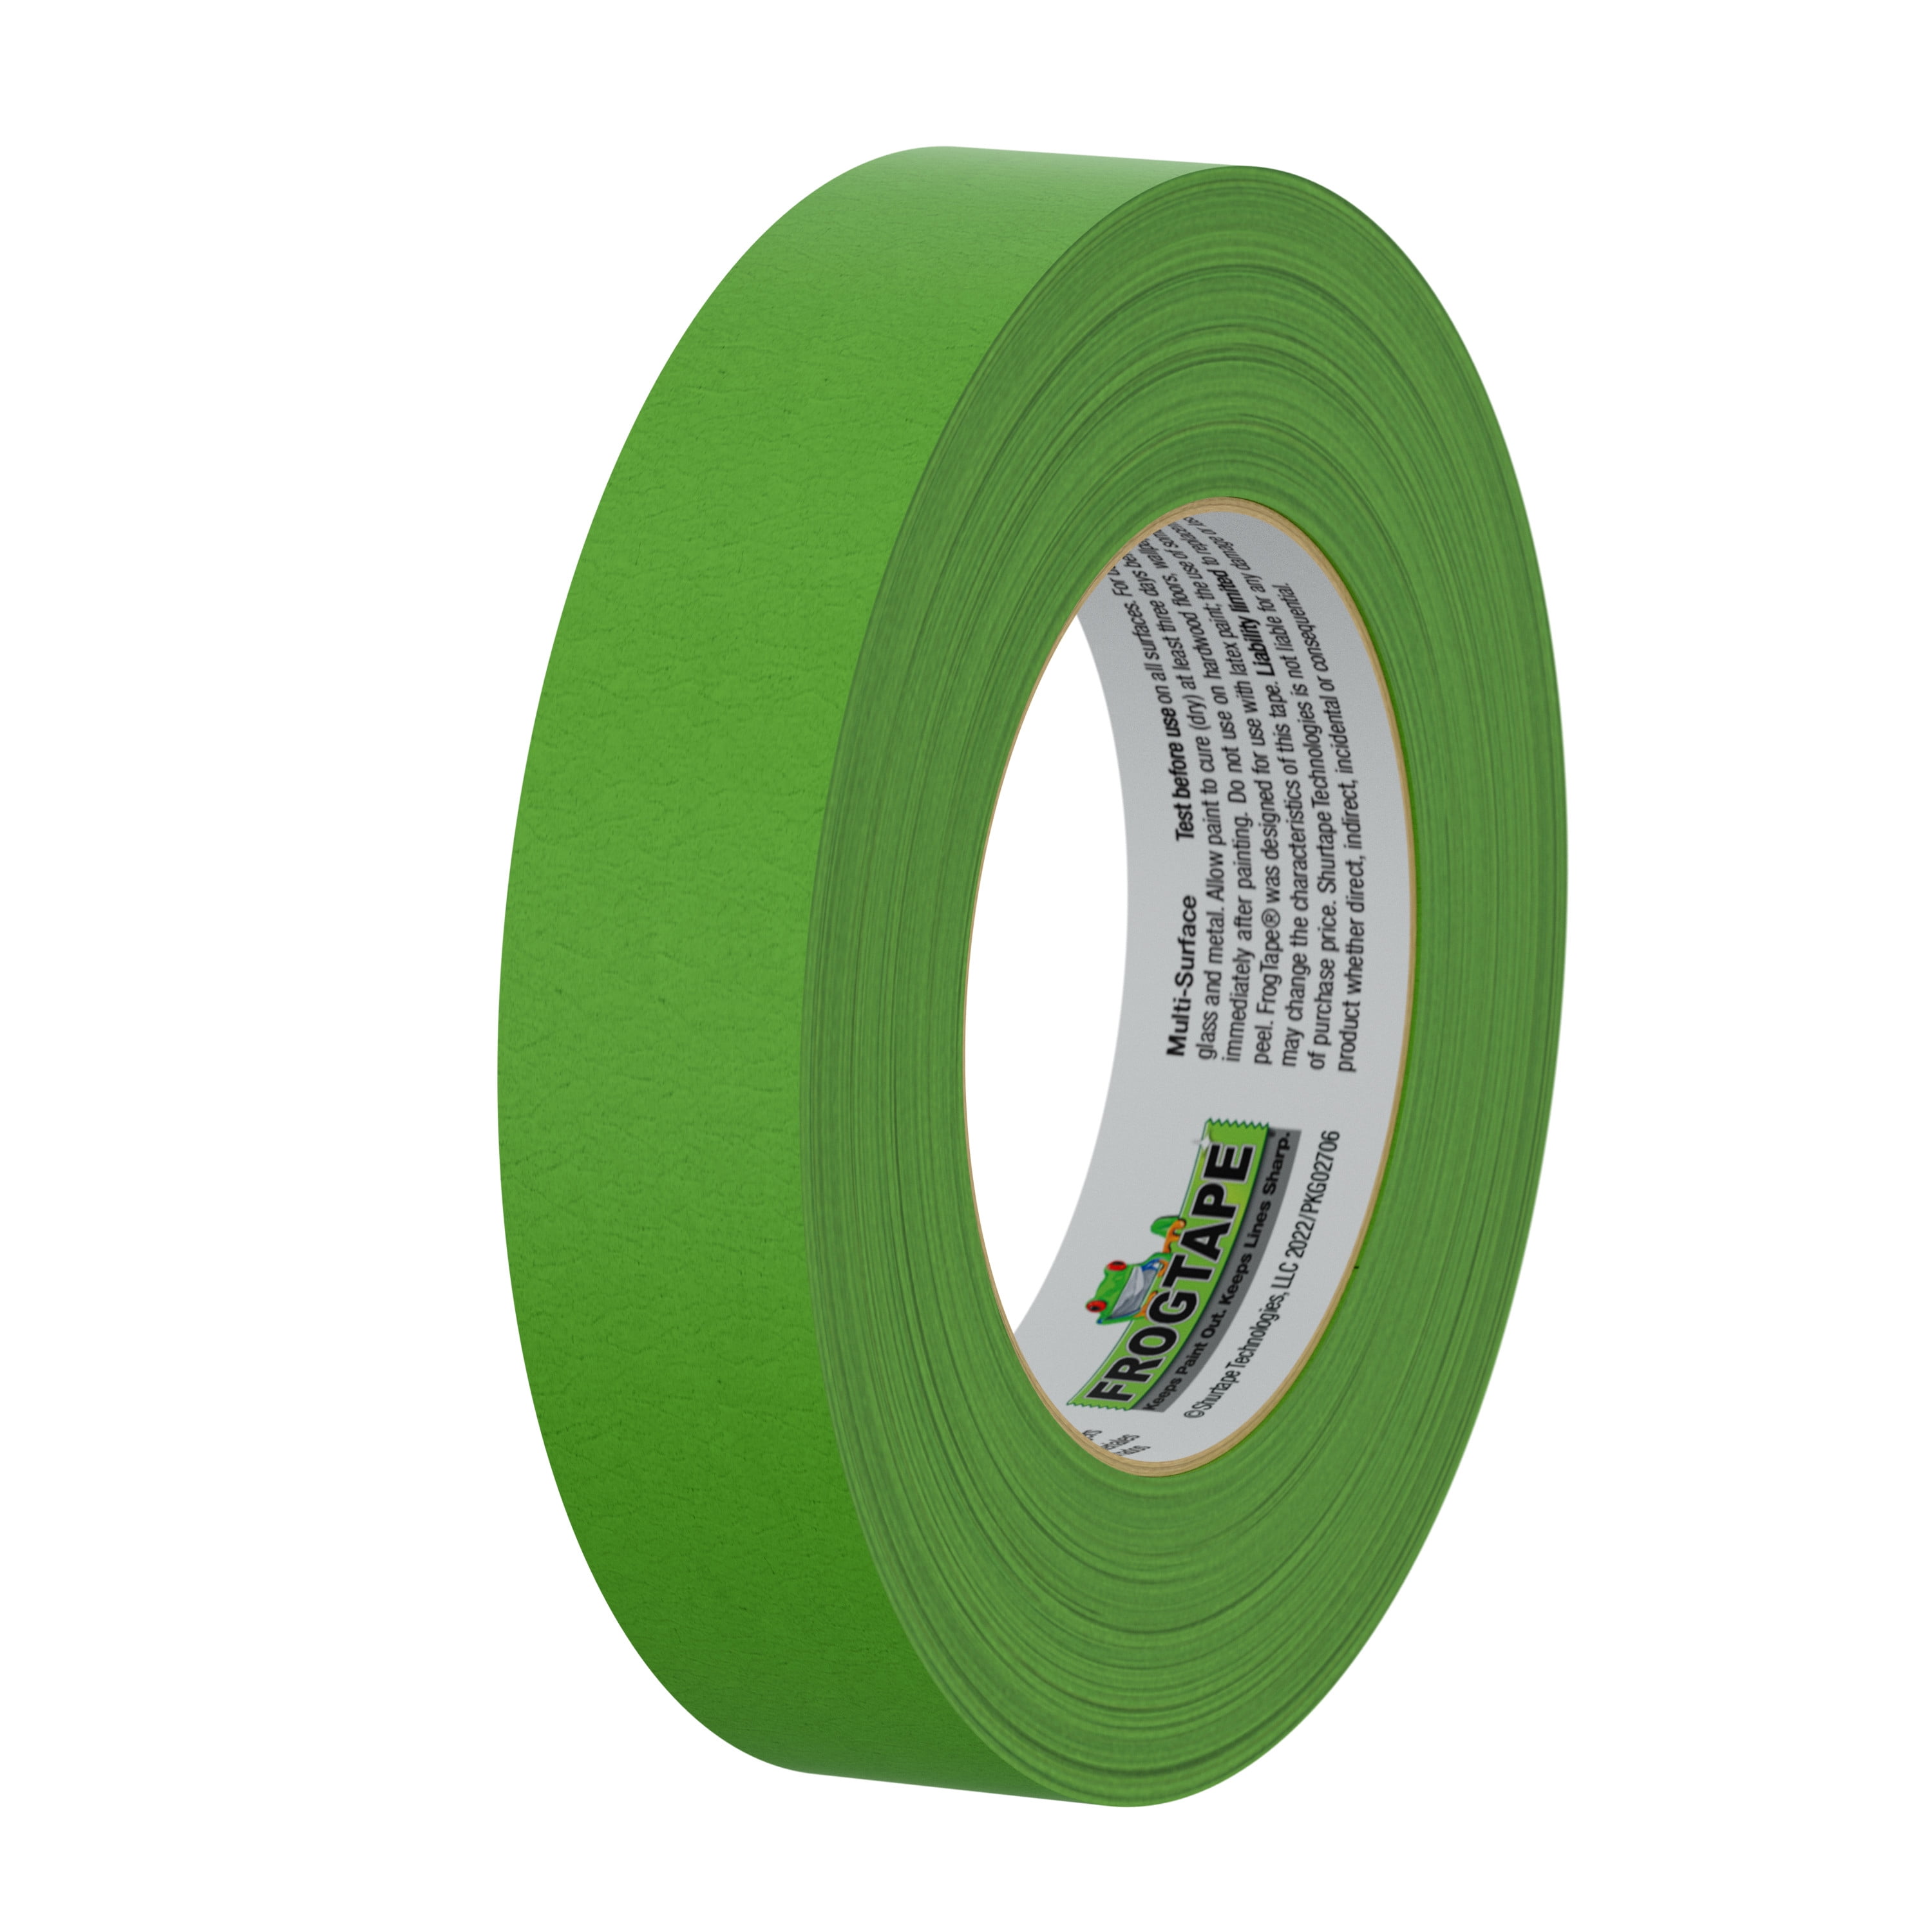 FROGTAPE 240661 Multi-Surface Painter's Tape, 1.88 Inches x 60 Yards,  Green, 3 Rolls w/ 1358463 Multi-Surface Painter's Tape, 0.94 Wide x 60  Yards